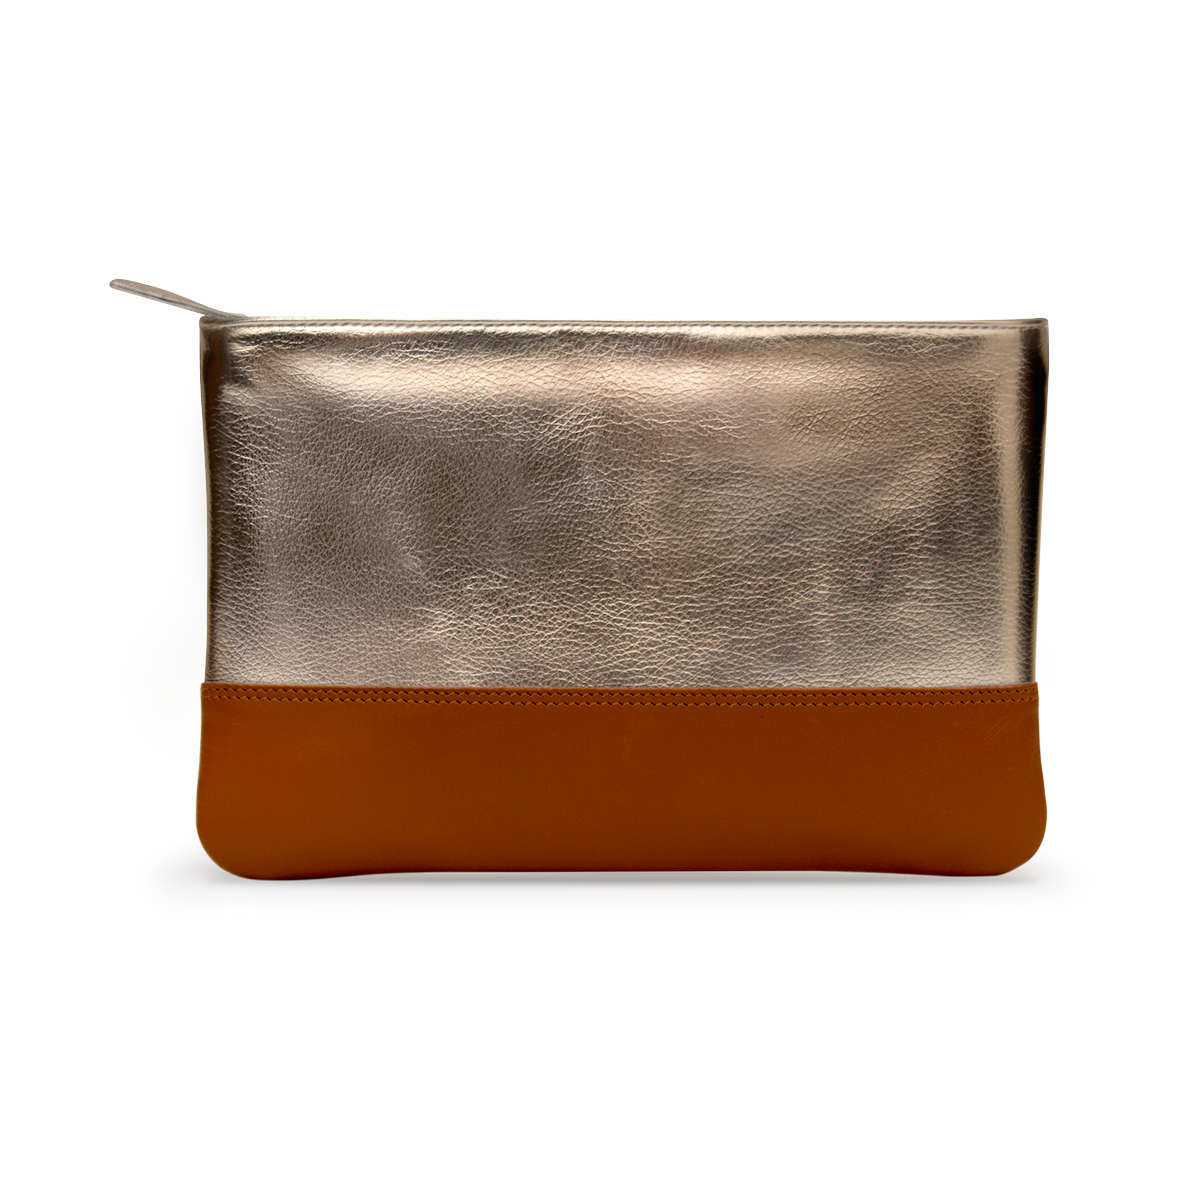 DailyObjects Gold Metallic Pu Faux Leather Regular Stash Pouch